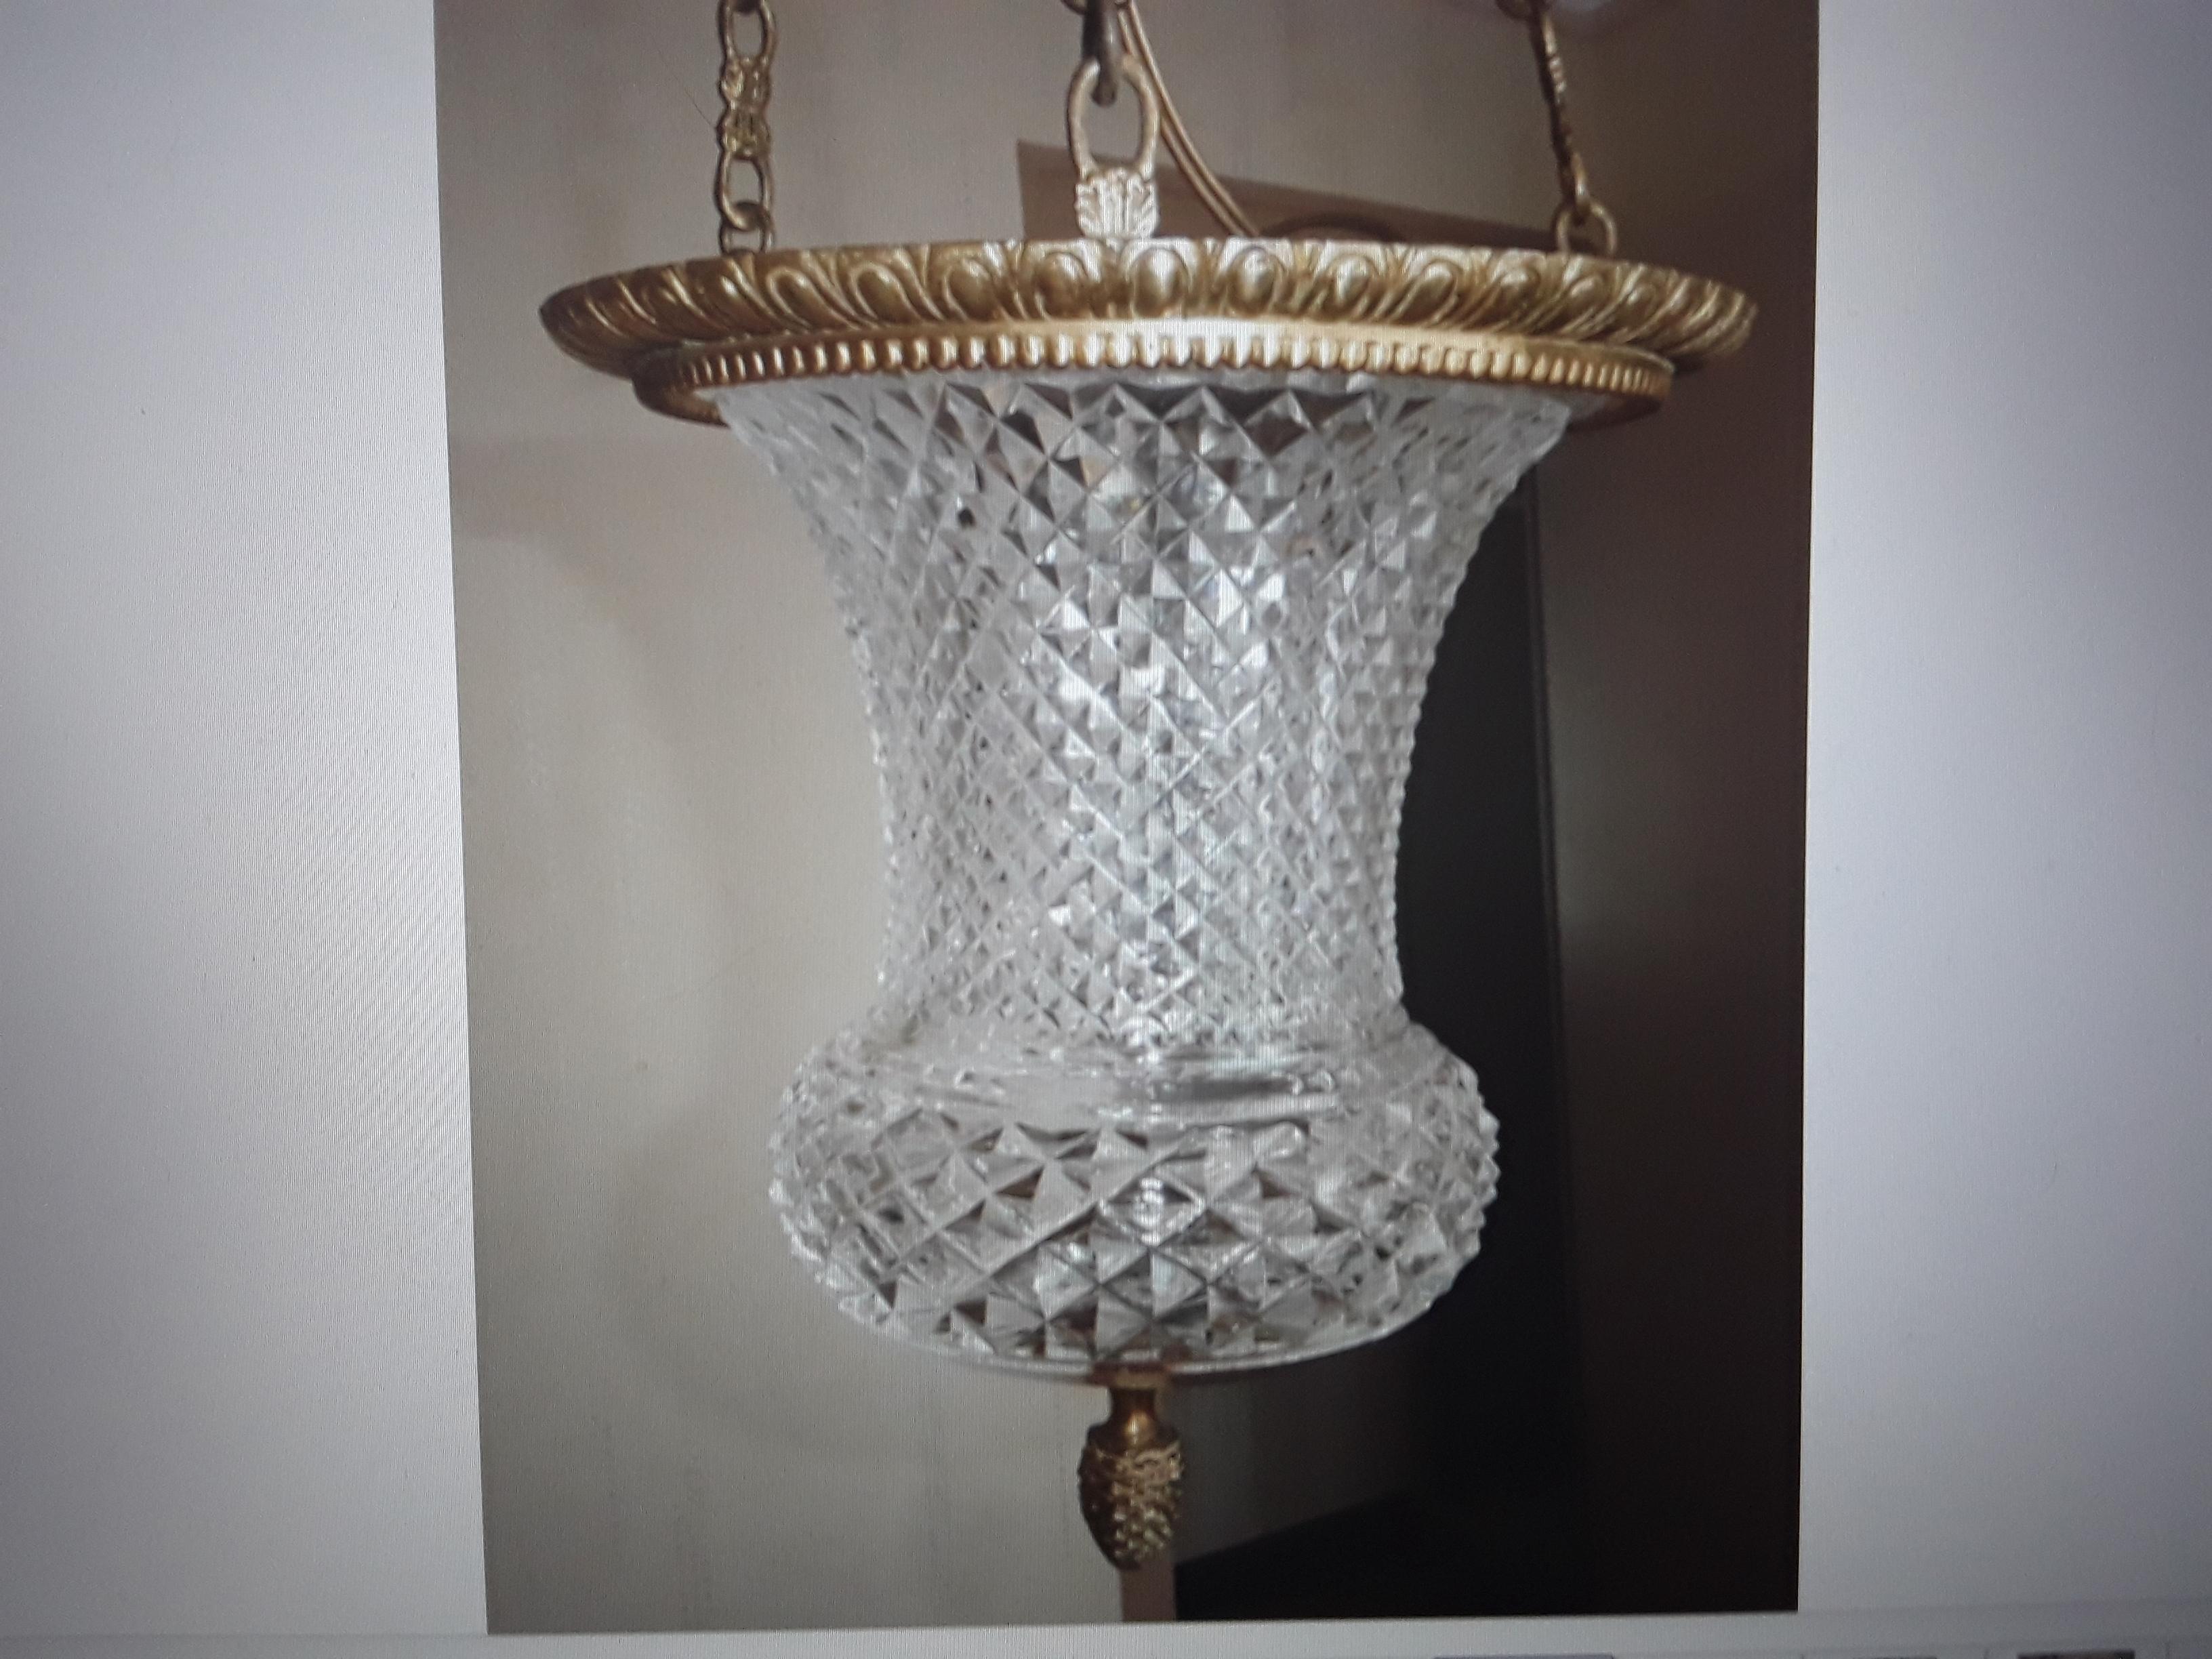 Absolutely Stunning 19thc French Louis XVI style Cut Crystal Lantern by Baccarat. Gilt bronze framed with upper section of Cut Crystal. This lantern is extrordinary. Very good condition.